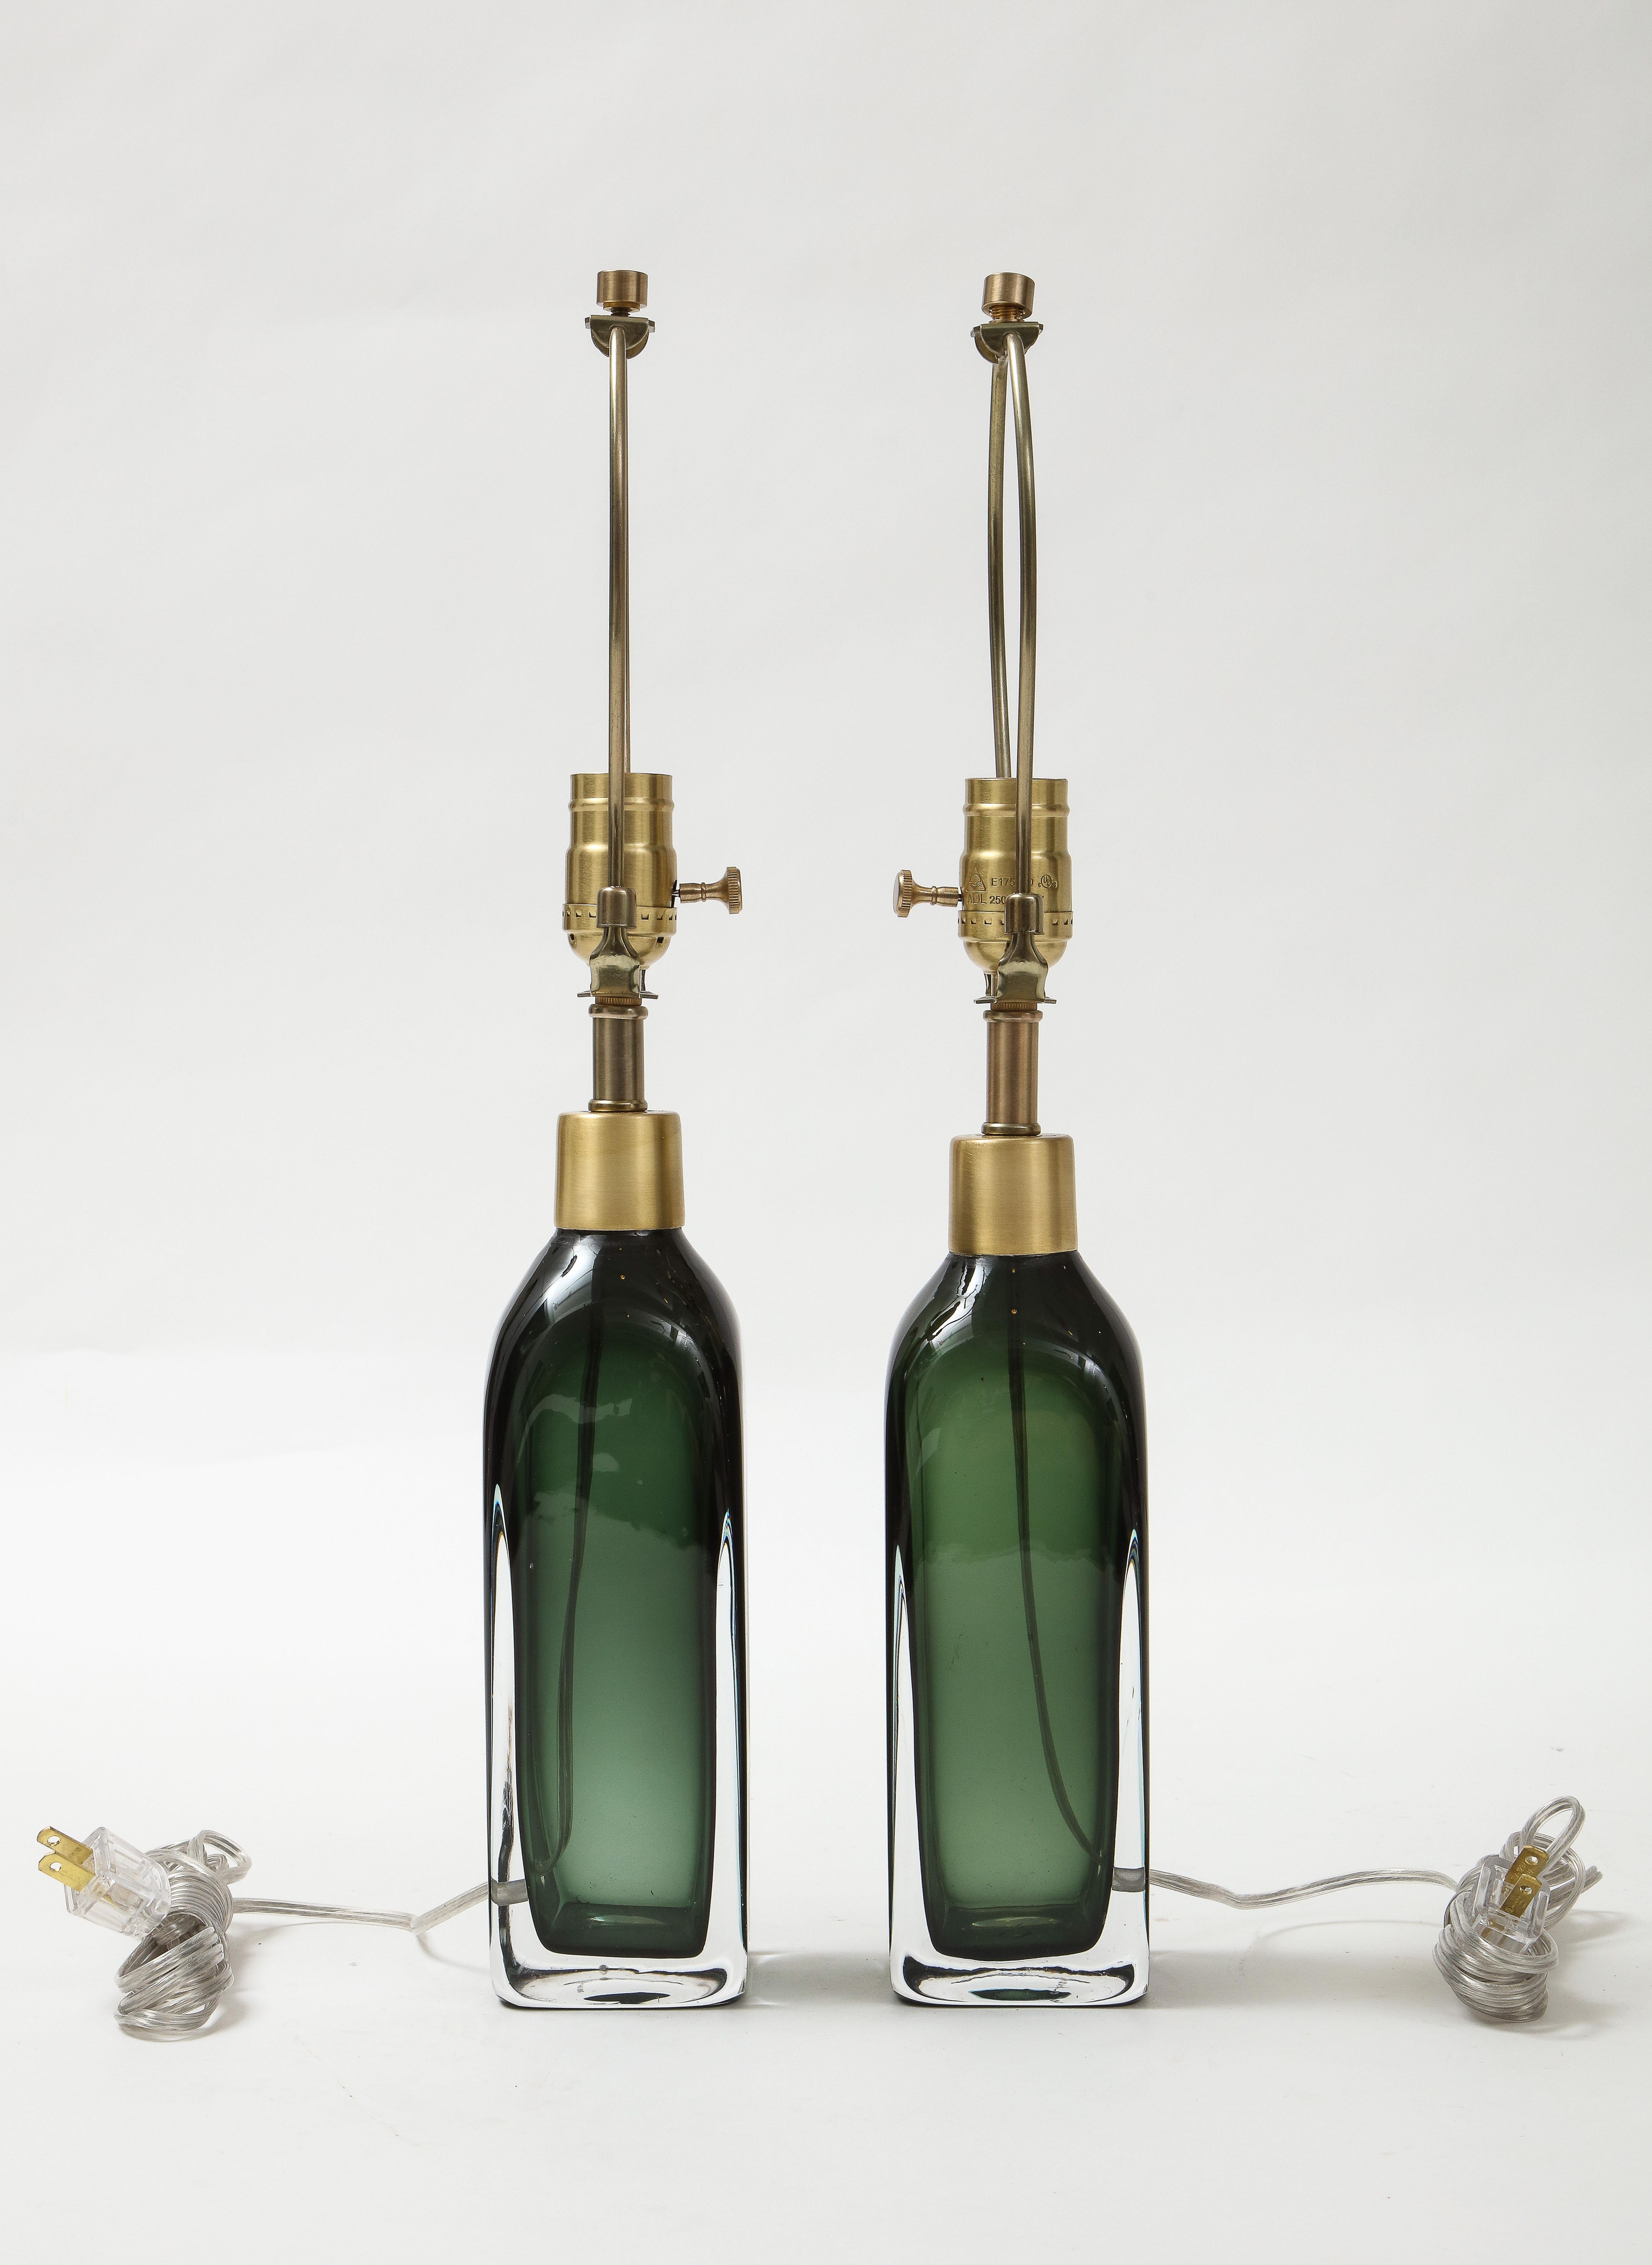 Pair of squared off bottle form cystal lamps in forest green with satin brass hardware. Professionally wired and buffed. 100W Max.